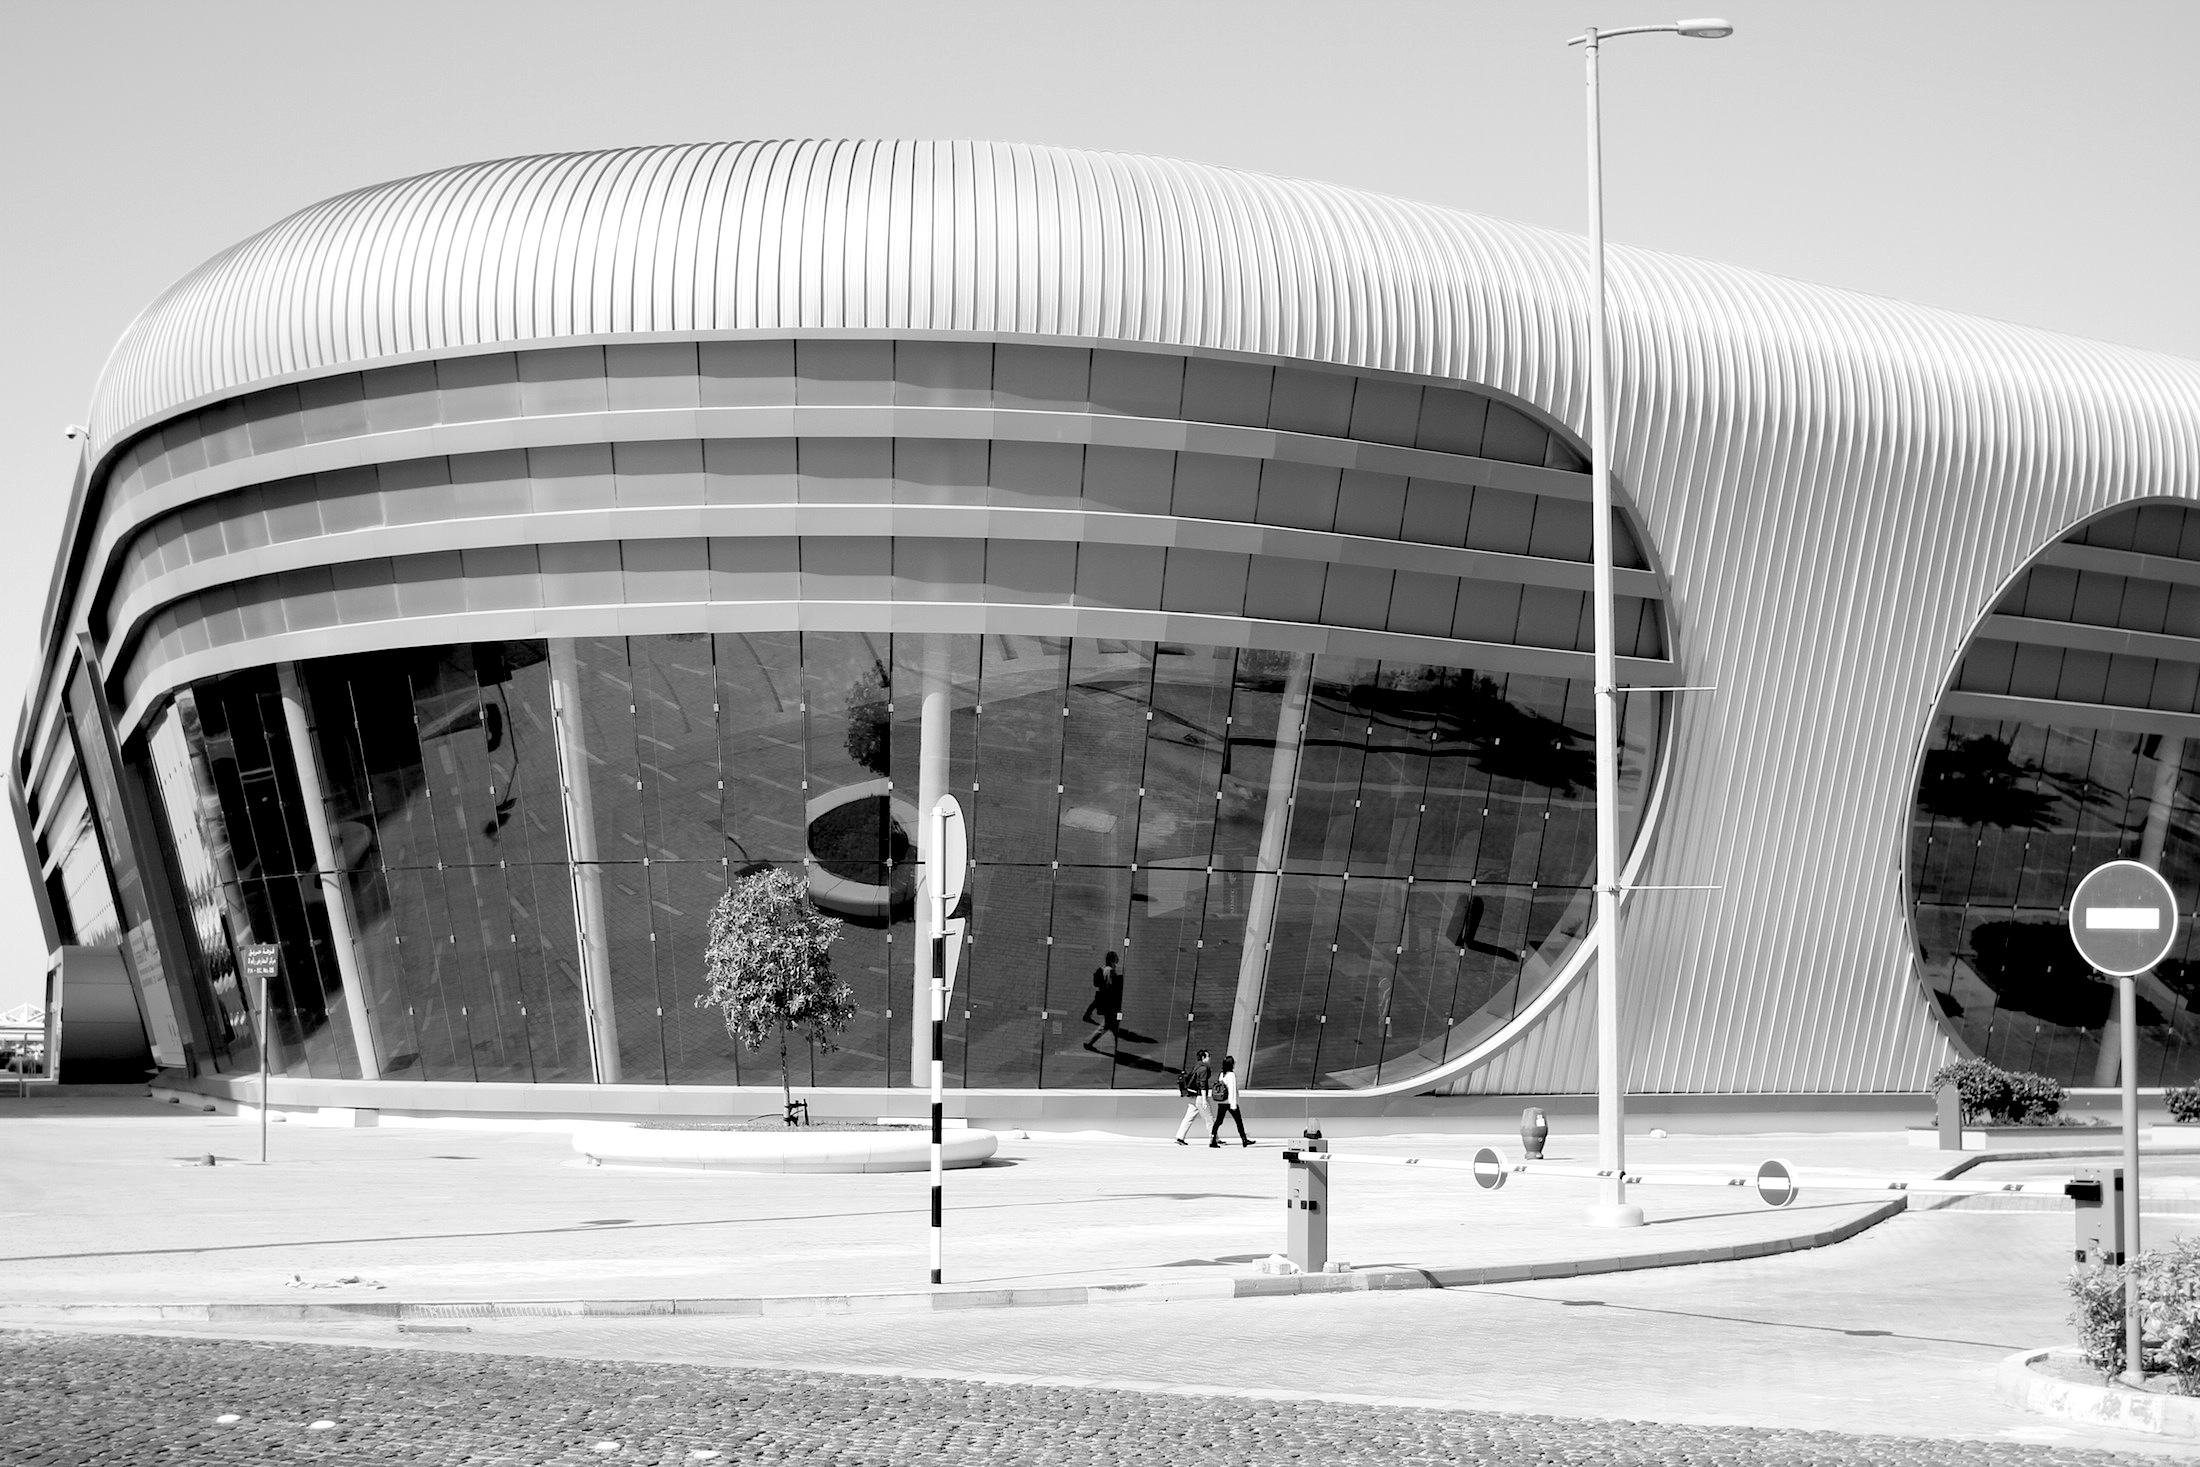 The ADNEC complex was designed by RMJM Architects.